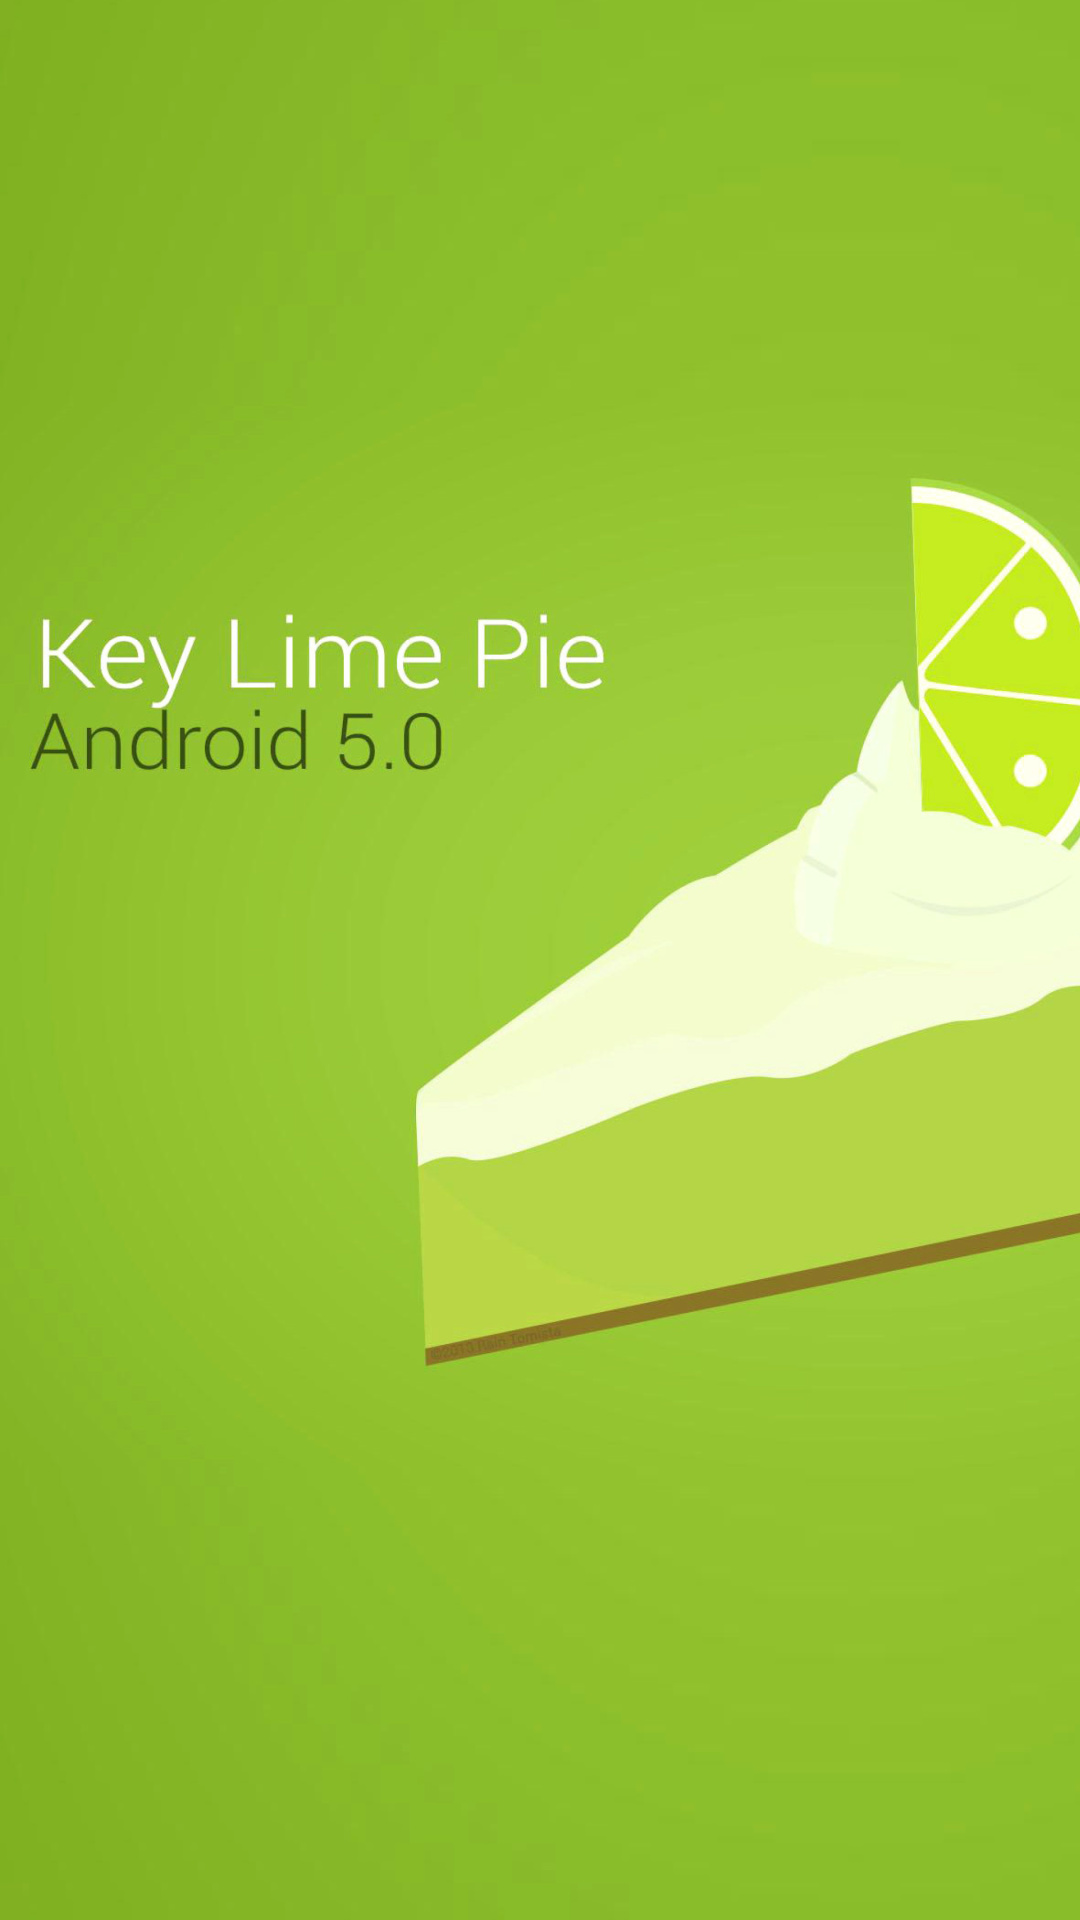 Concept Android 5.0 Key Lime Pie wallpaper 1080x1920